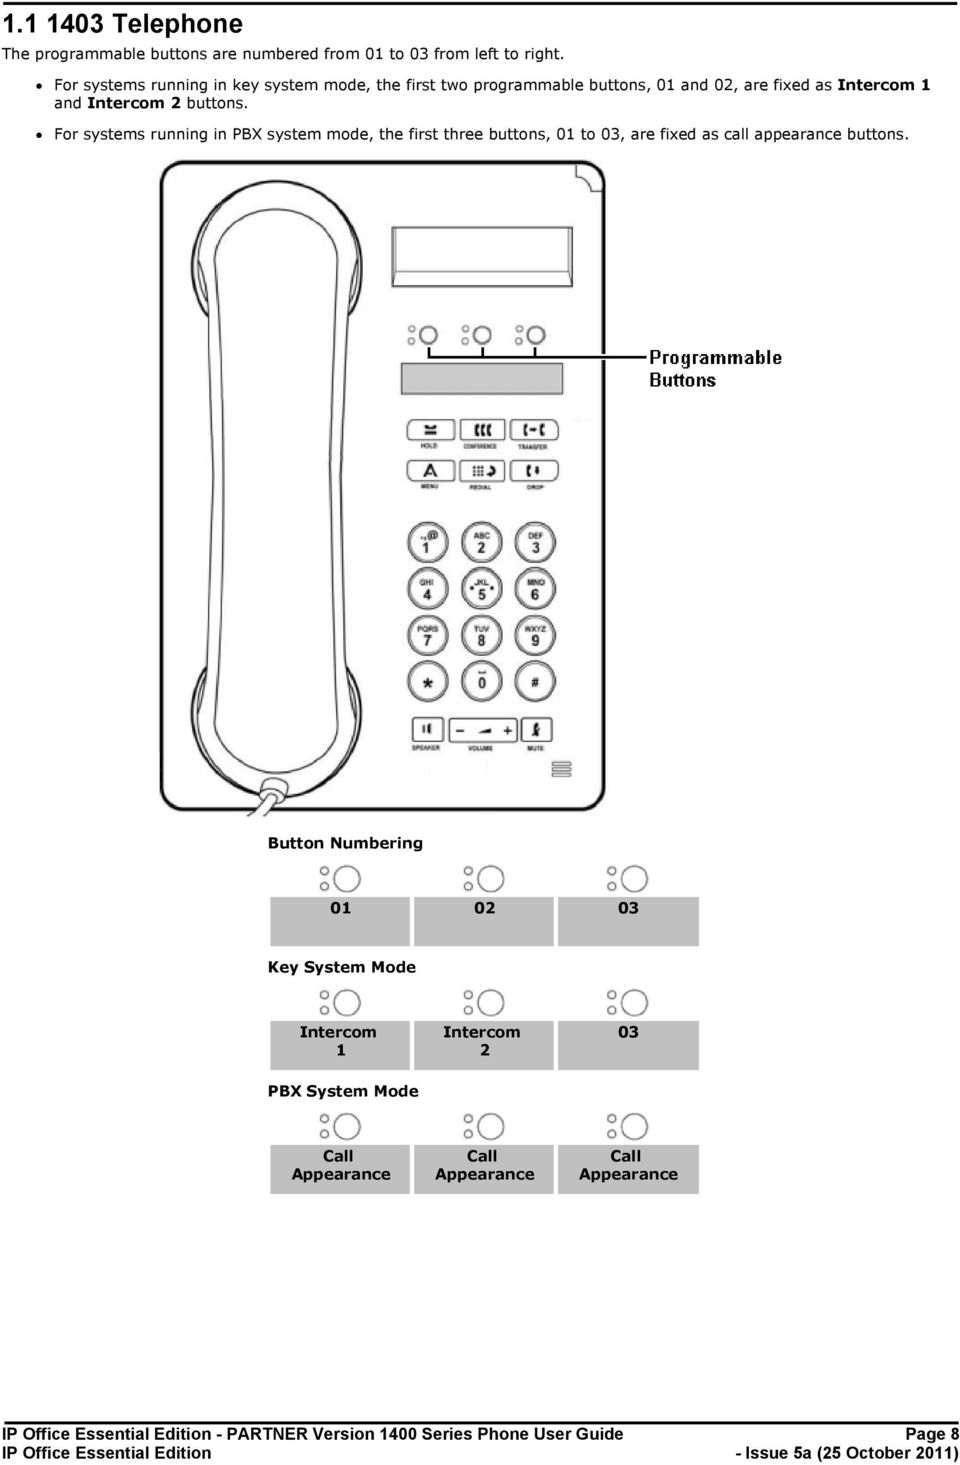 buttons. For systems running in PBX system mode, the first three buttons, 01 to 03, are fixed as call appearance buttons.